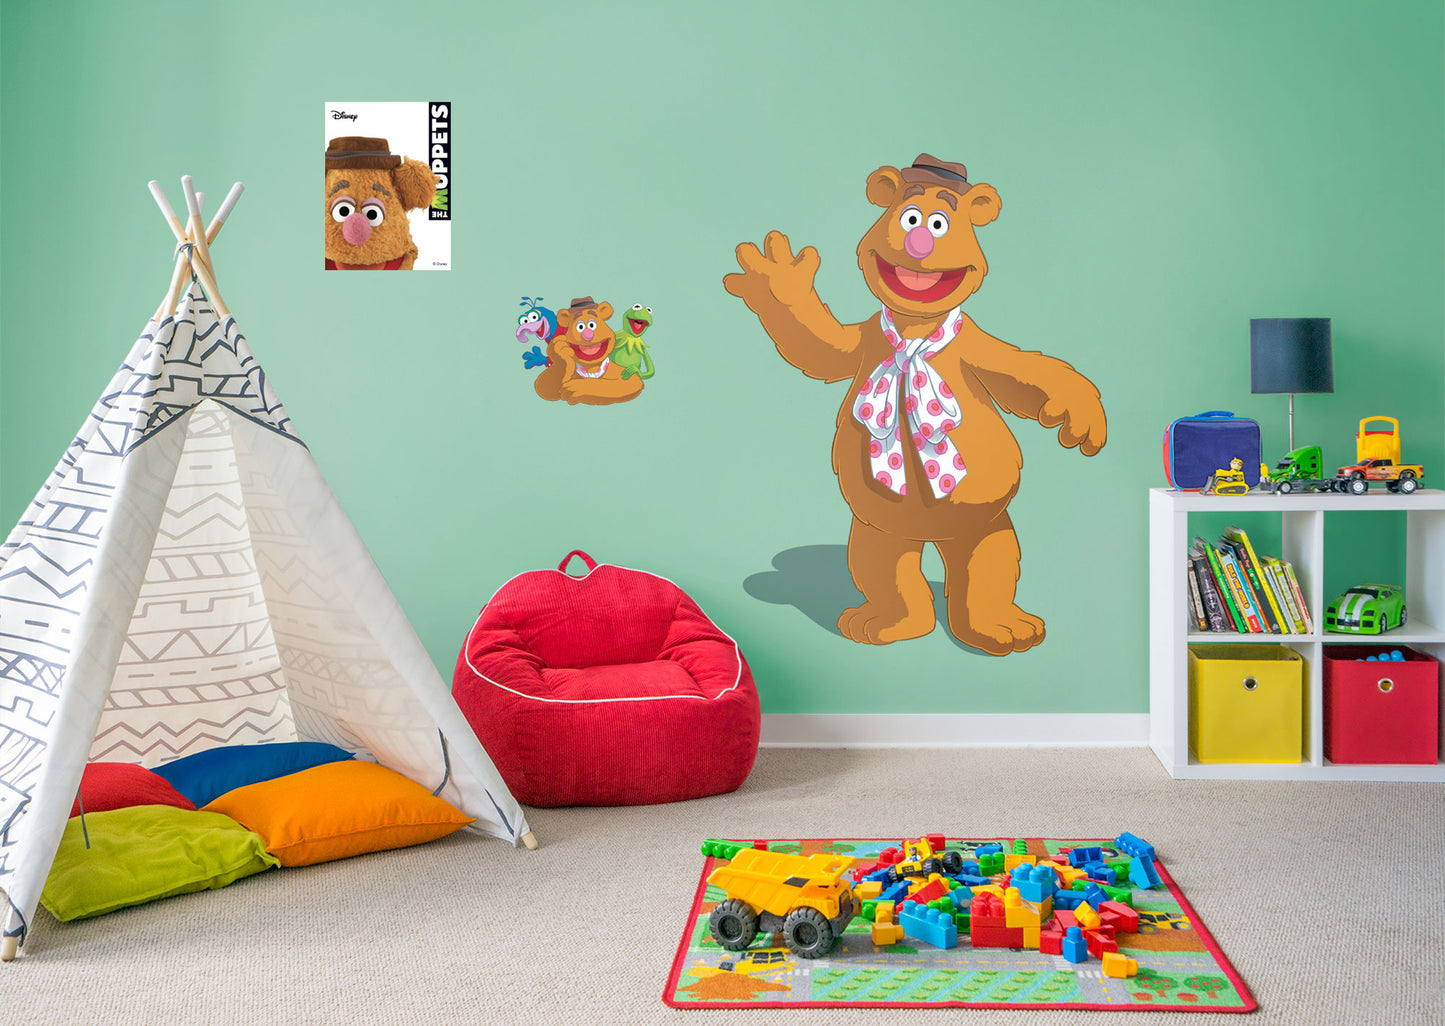 The Muppets: Fozzie Bear RealBig        - Officially Licensed Disney Removable Wall   Adhesive Decal